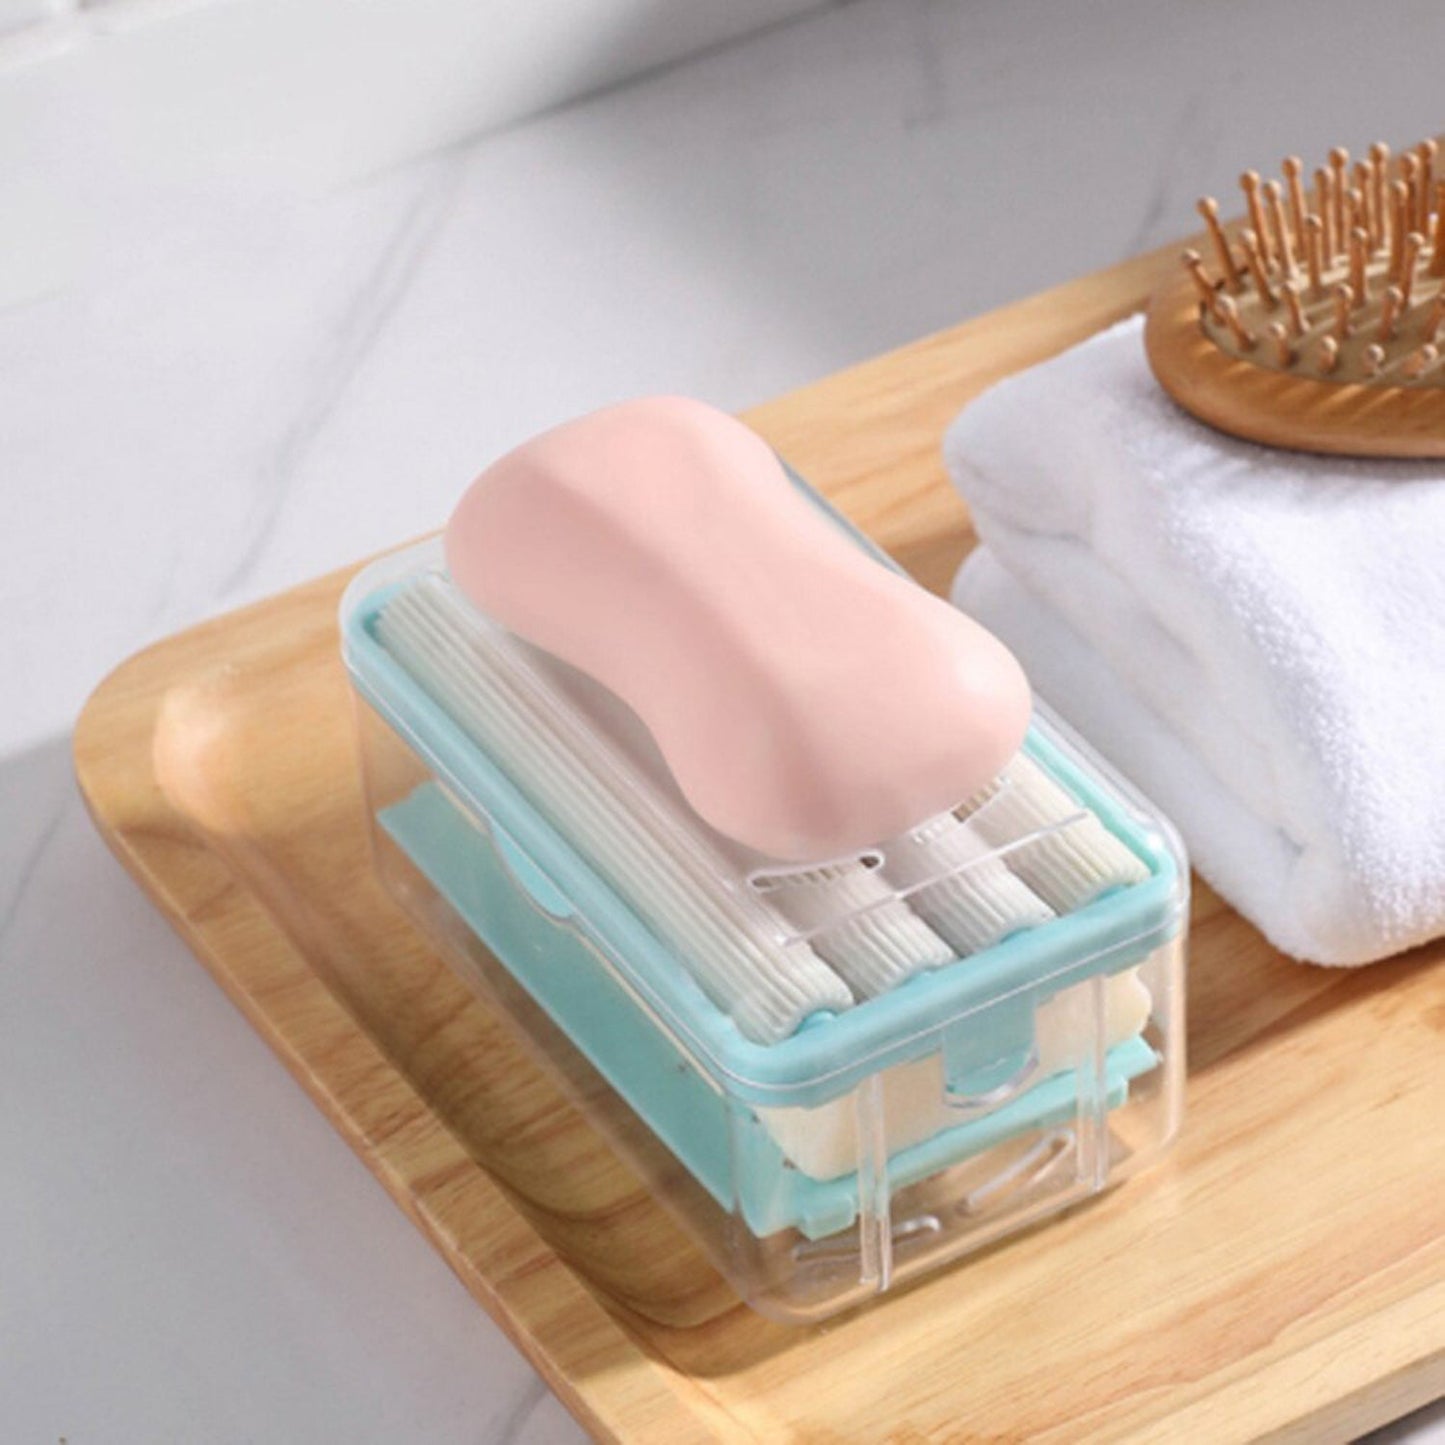 2-in-1 Portable Soap Dish & Soap Dispenser with Roller and Drain Holes, Foaming Soap Bar Box